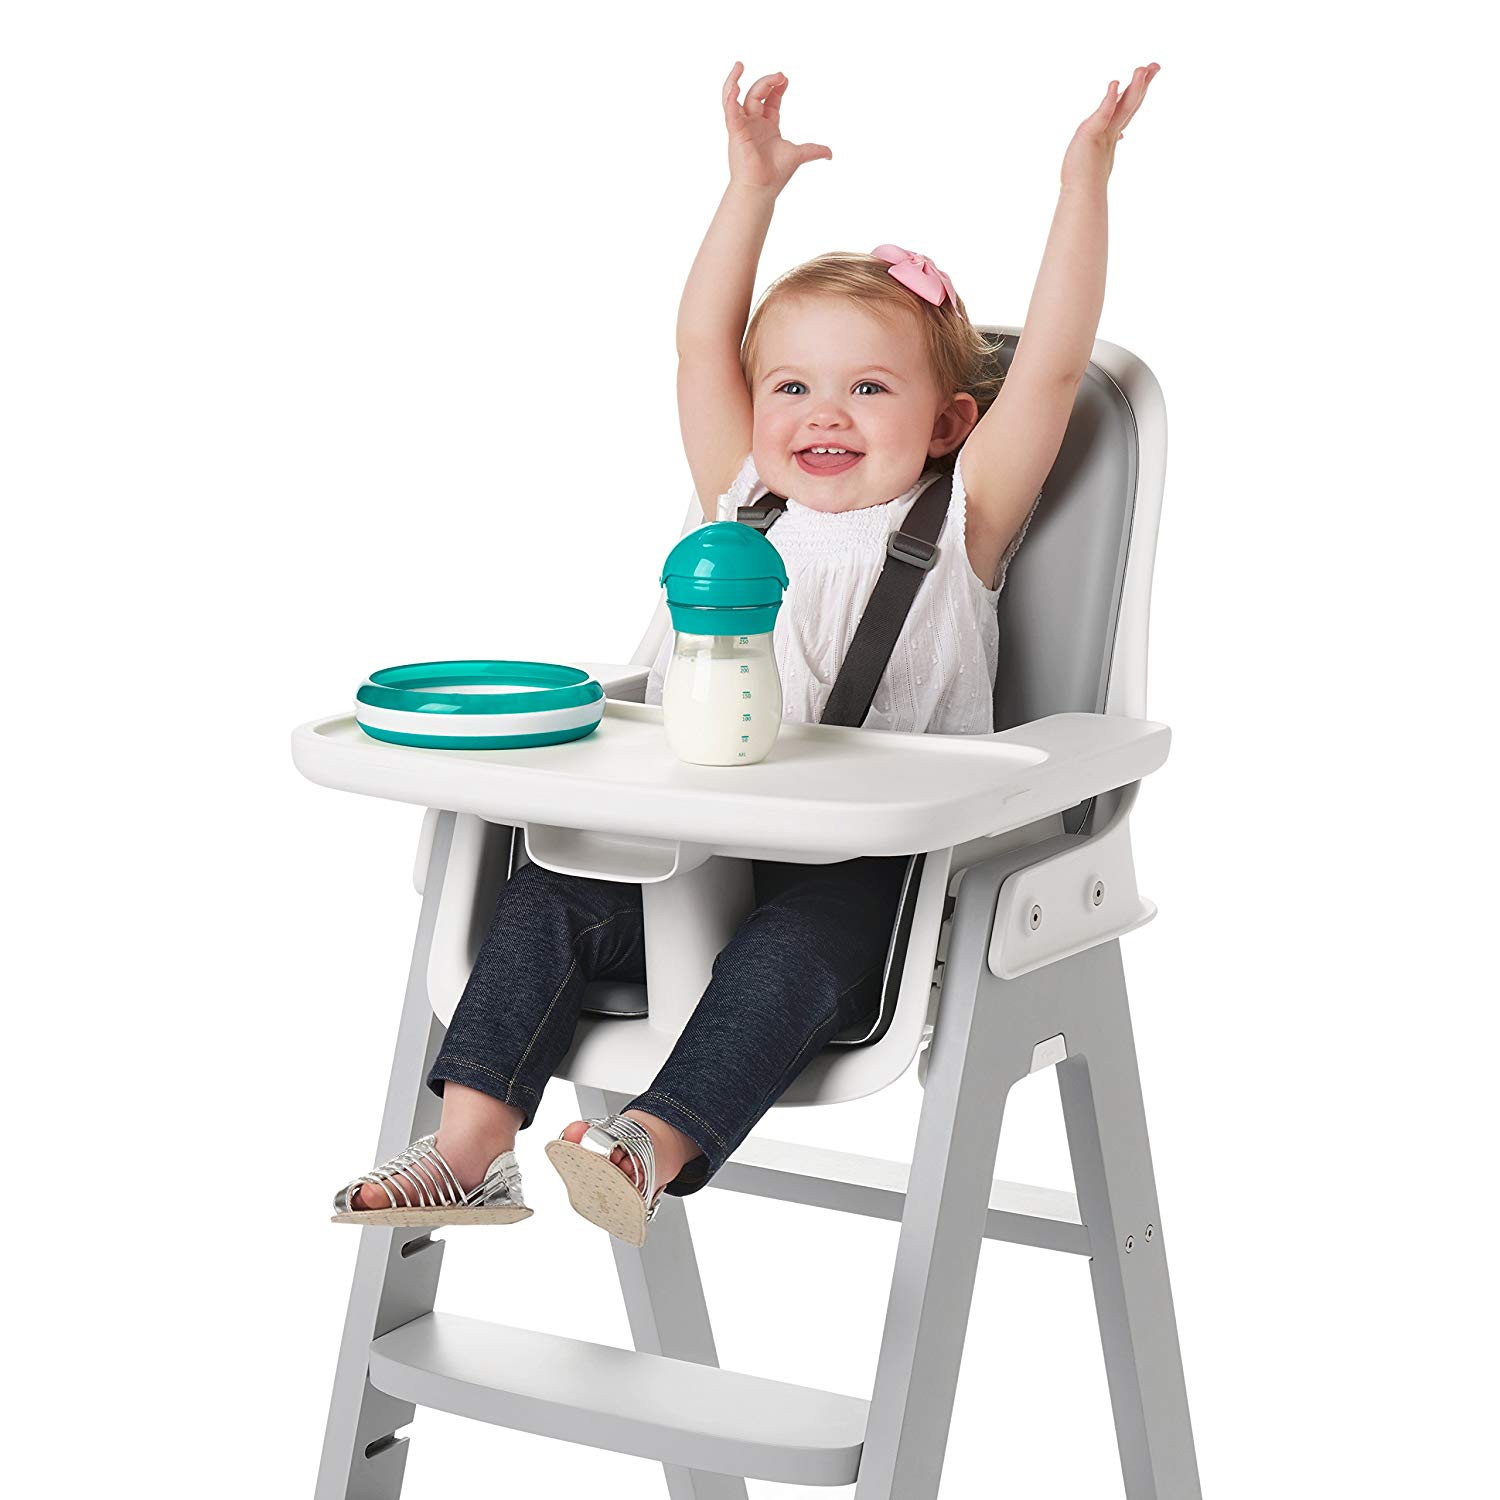 Niche Babies - OXO Tot Transitions Straw Cup with Removable